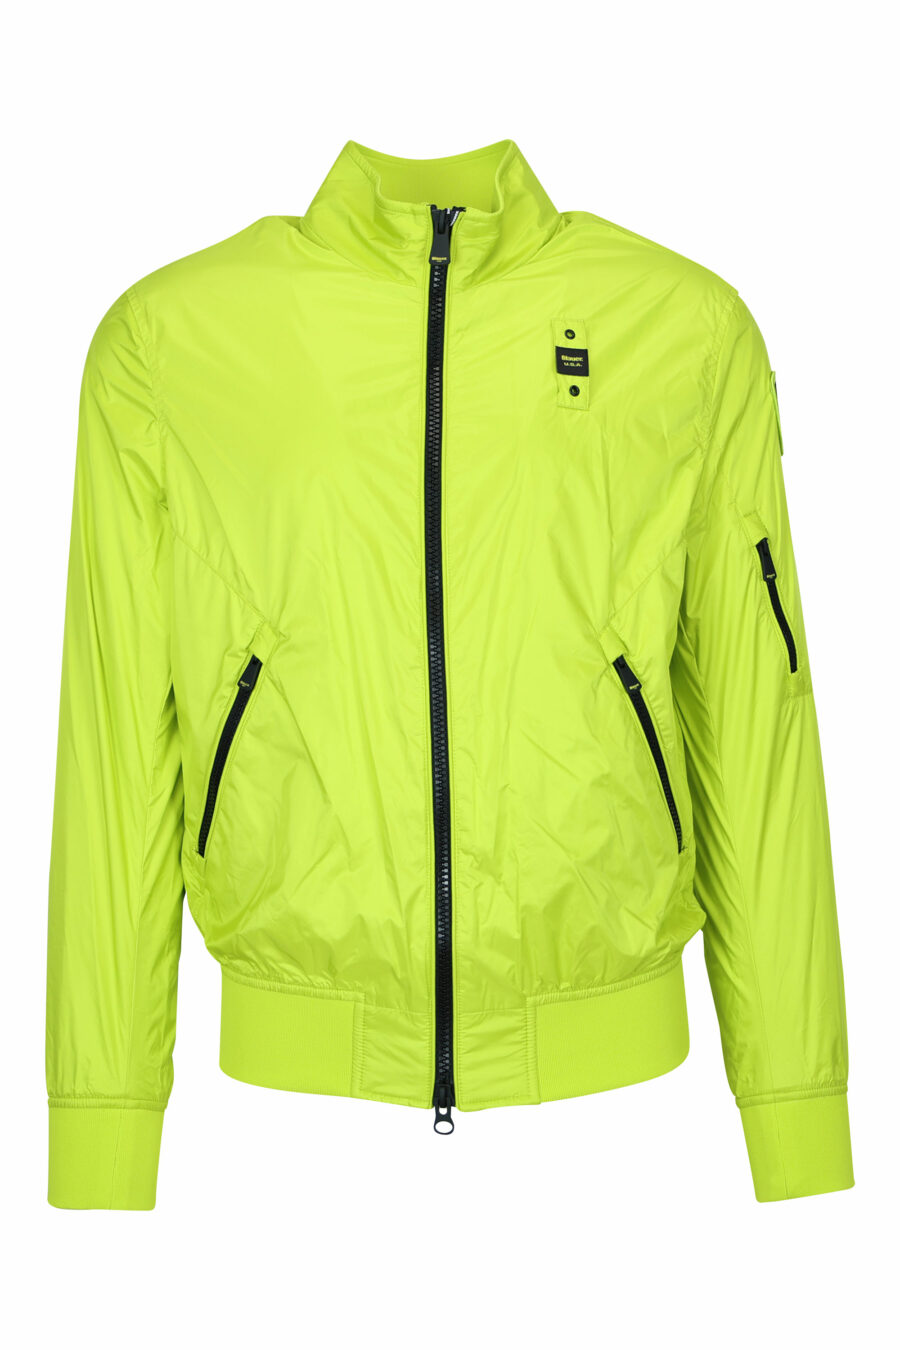 Yellow jacket with side zip and logo - 8058610765828